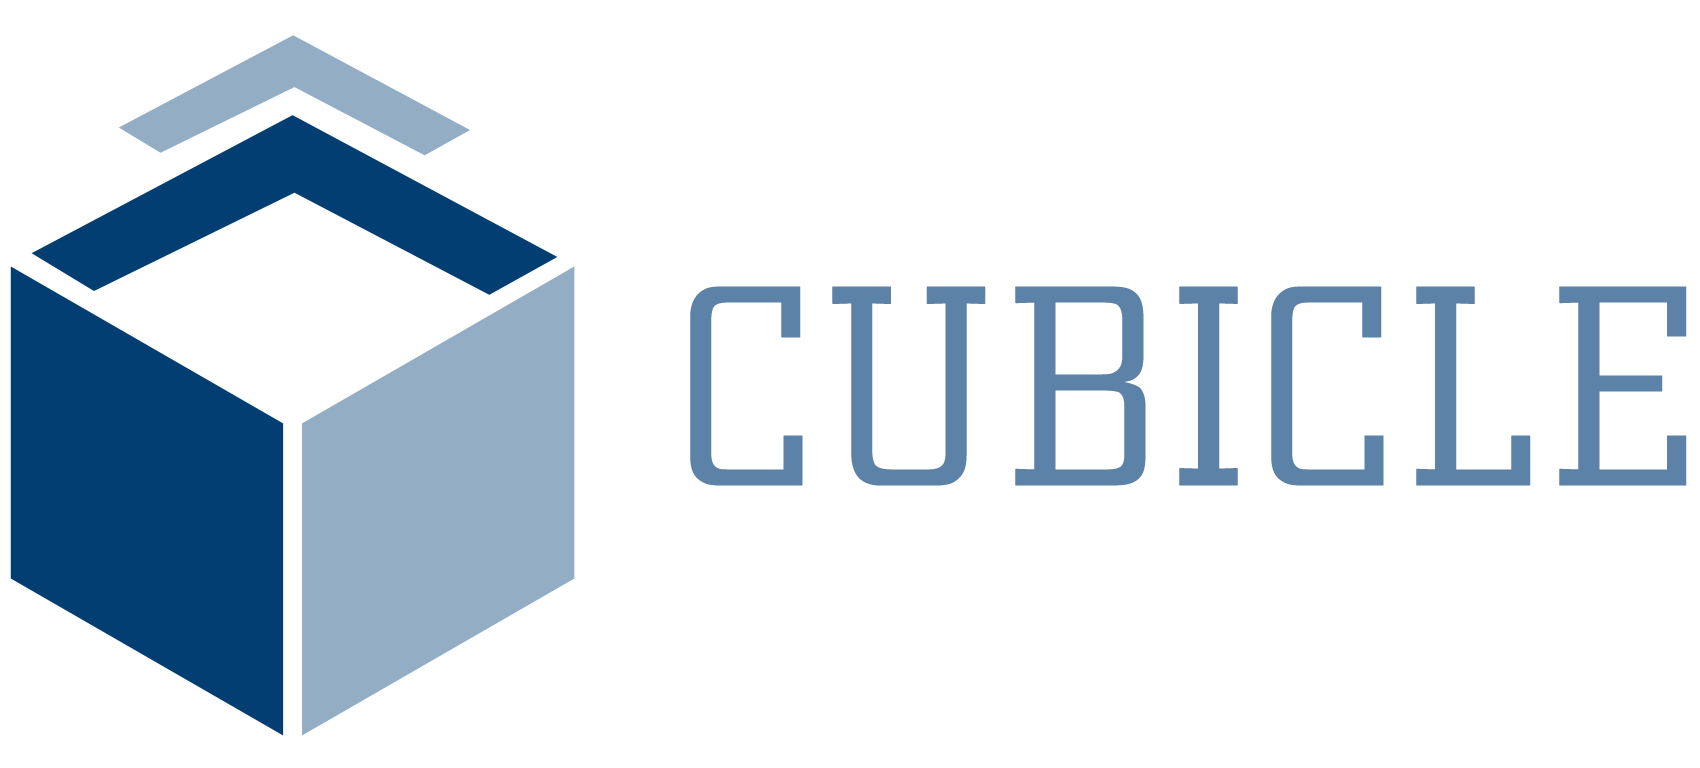 Cubicle Logo - CubicleProjects Logo - WorkPack